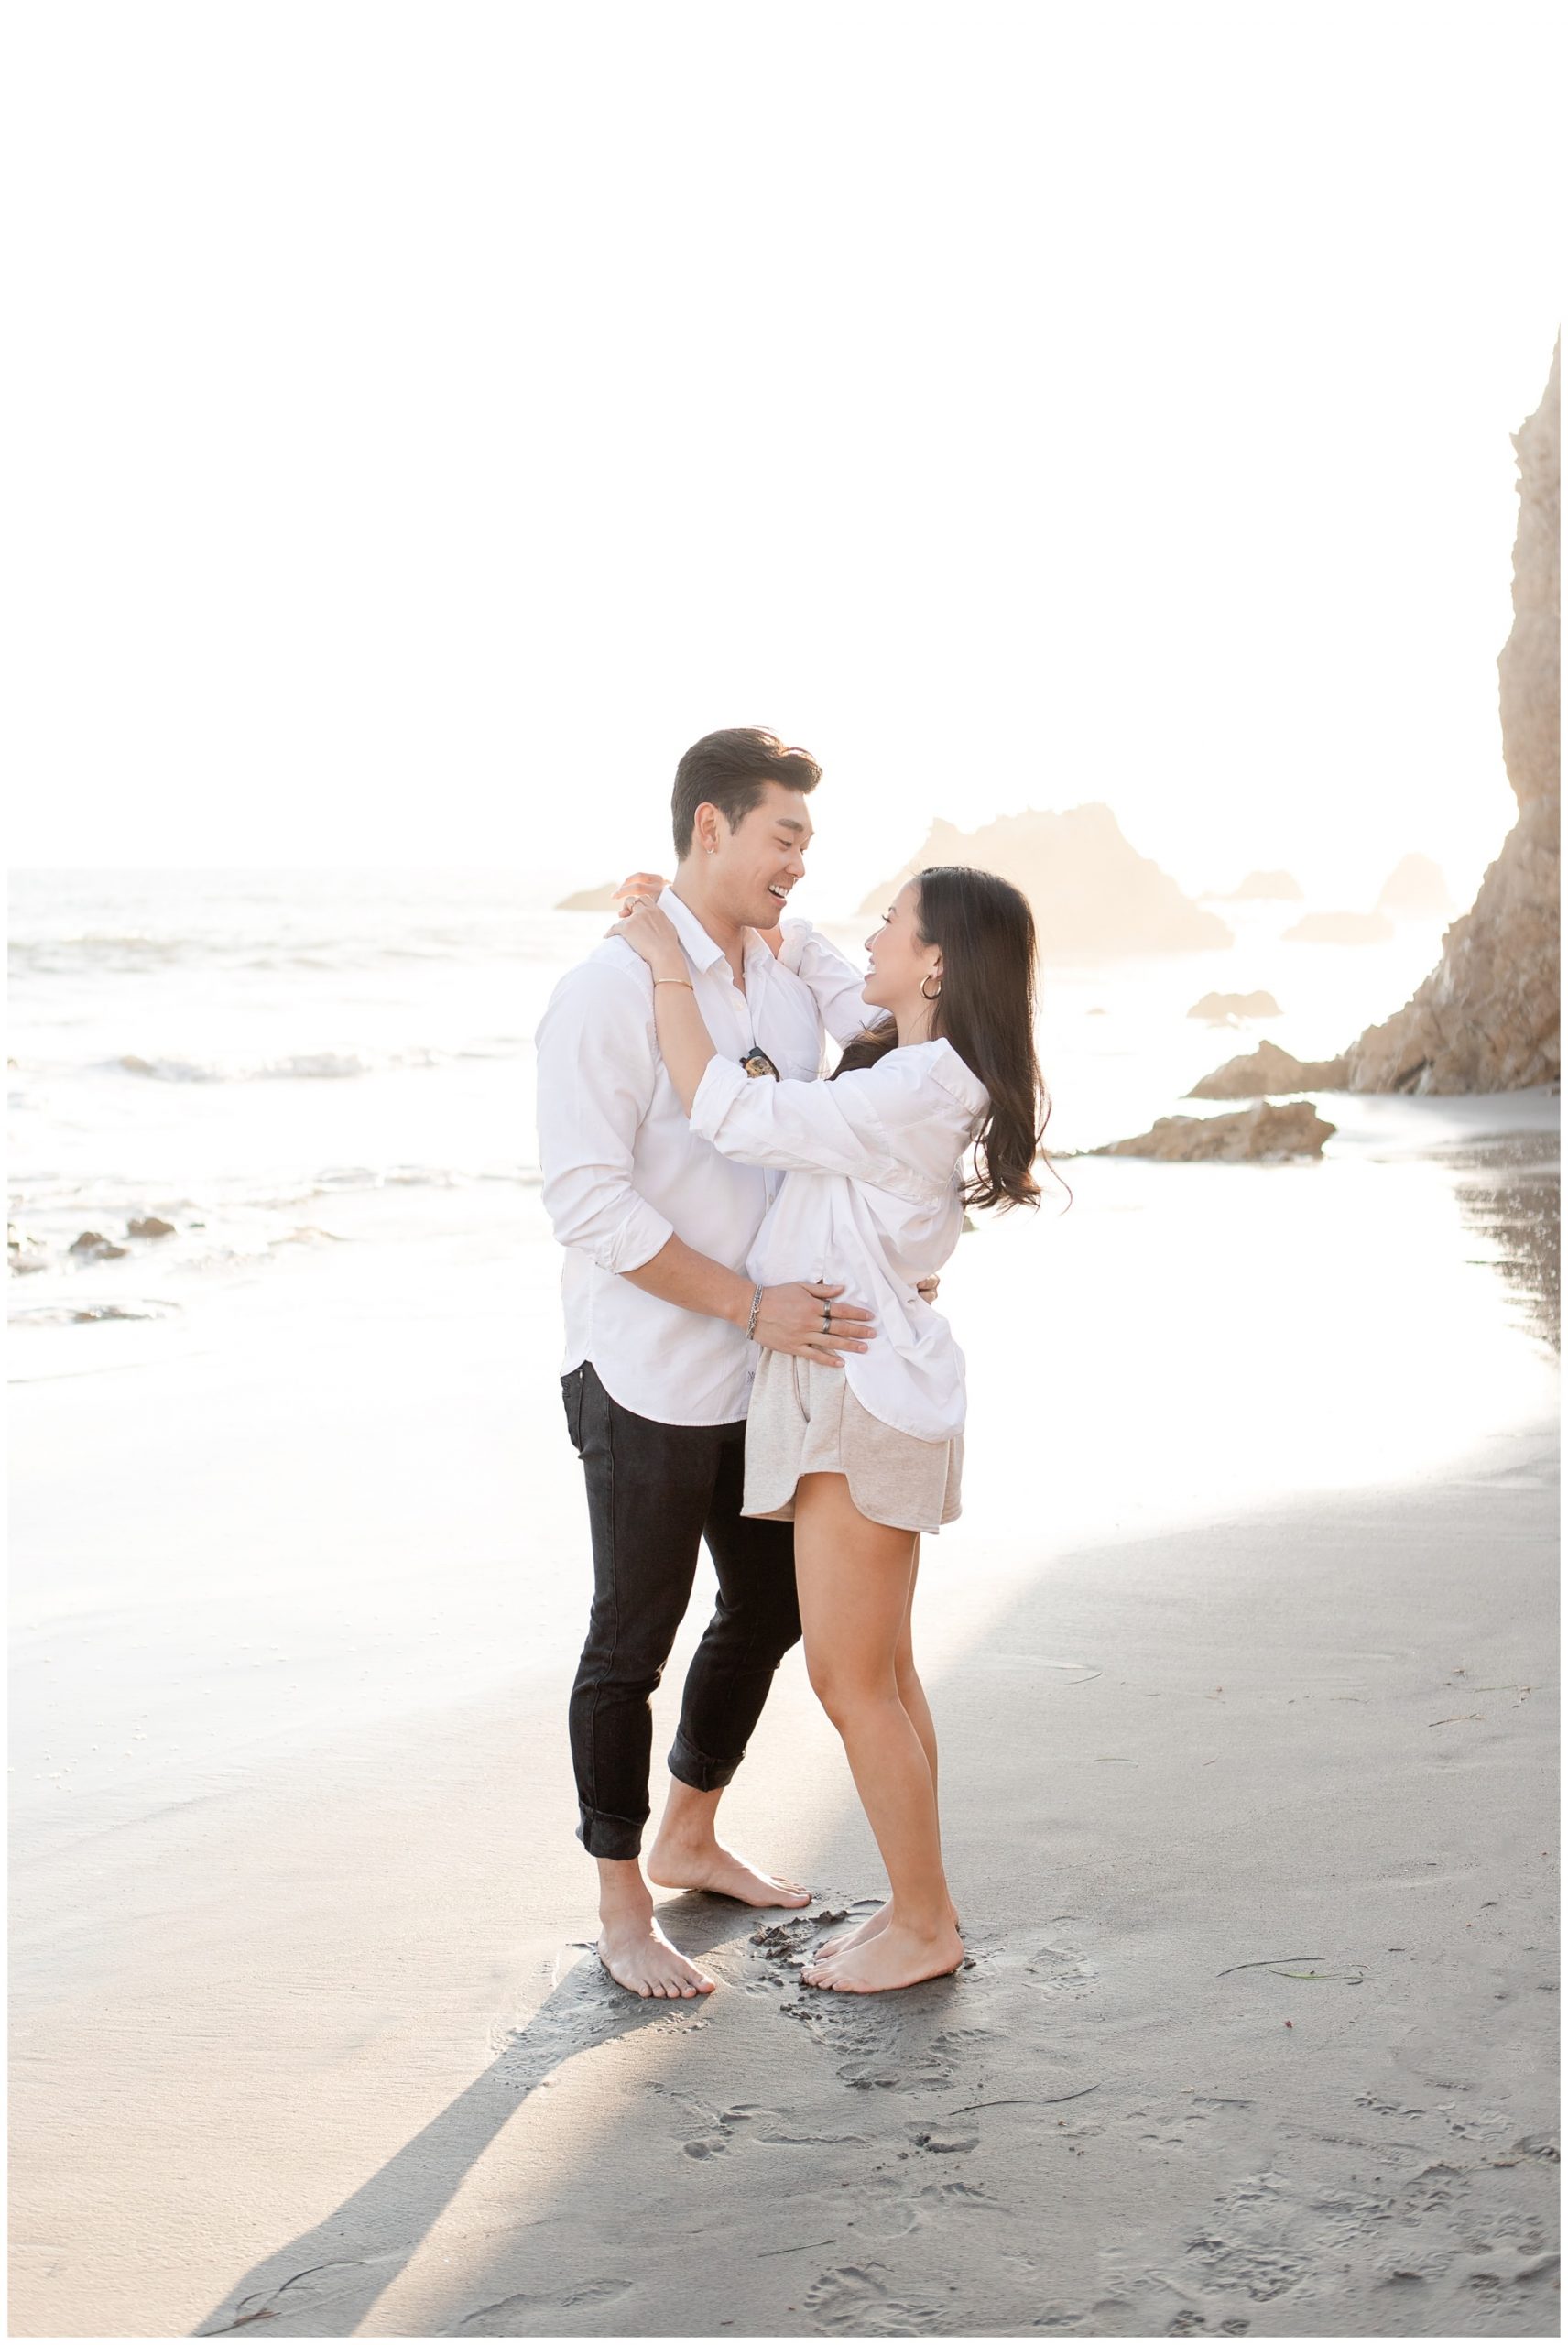 Engagement pictures on beach during sunset. CA